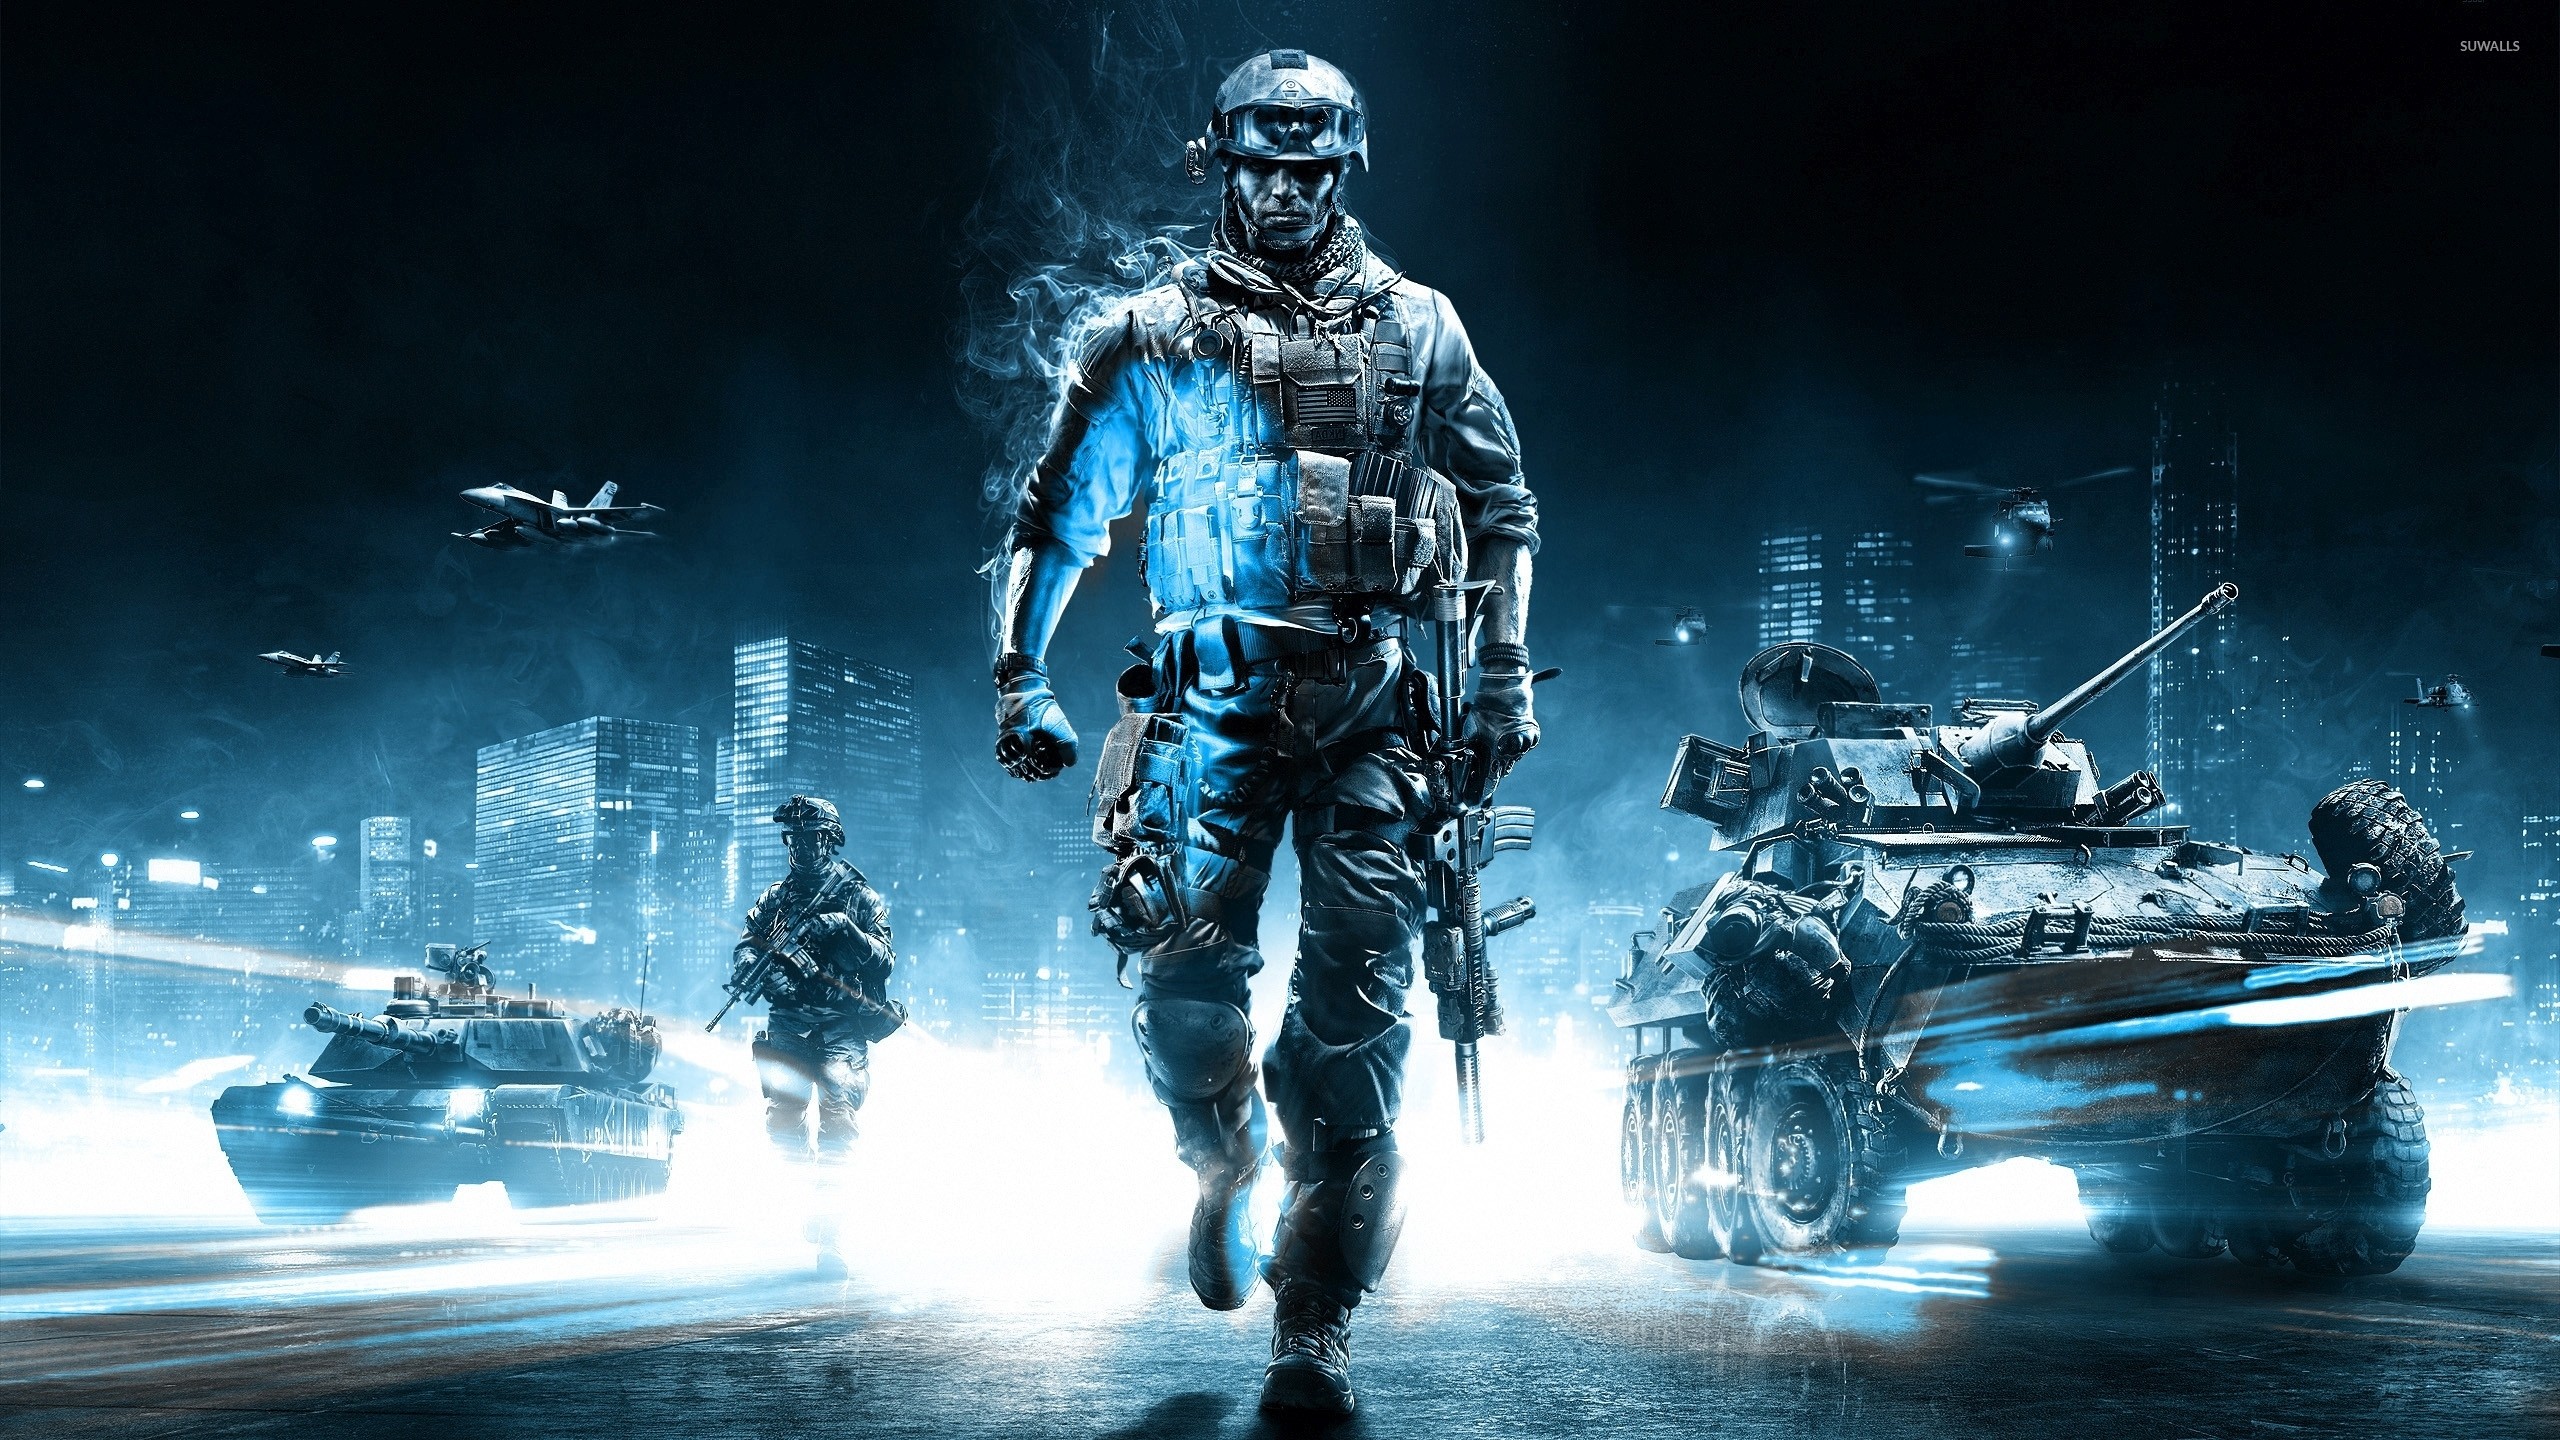 1440 x 2560 4k wallpaper,action adventure game,movie,pc game,action film,soldier